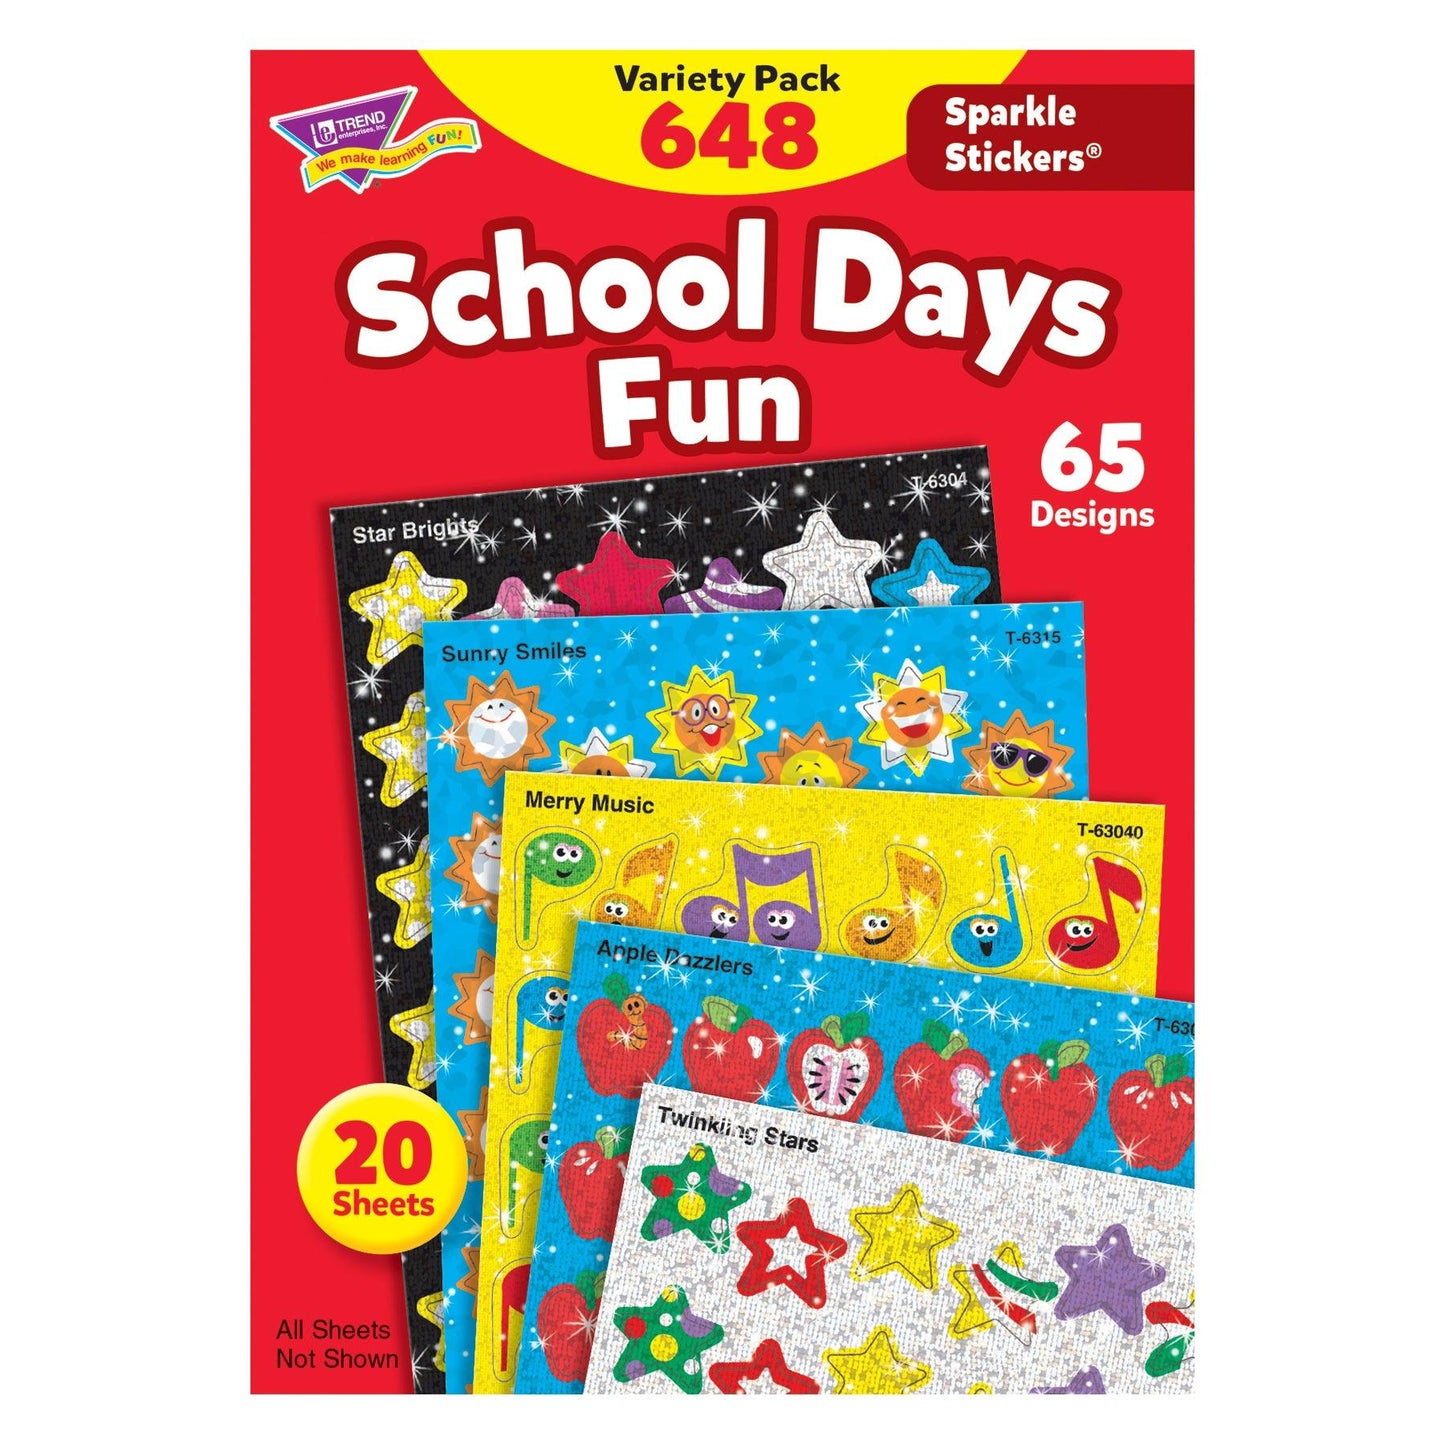 School Days Sparkle Stickers® Variety Pack, 648 ct - Loomini